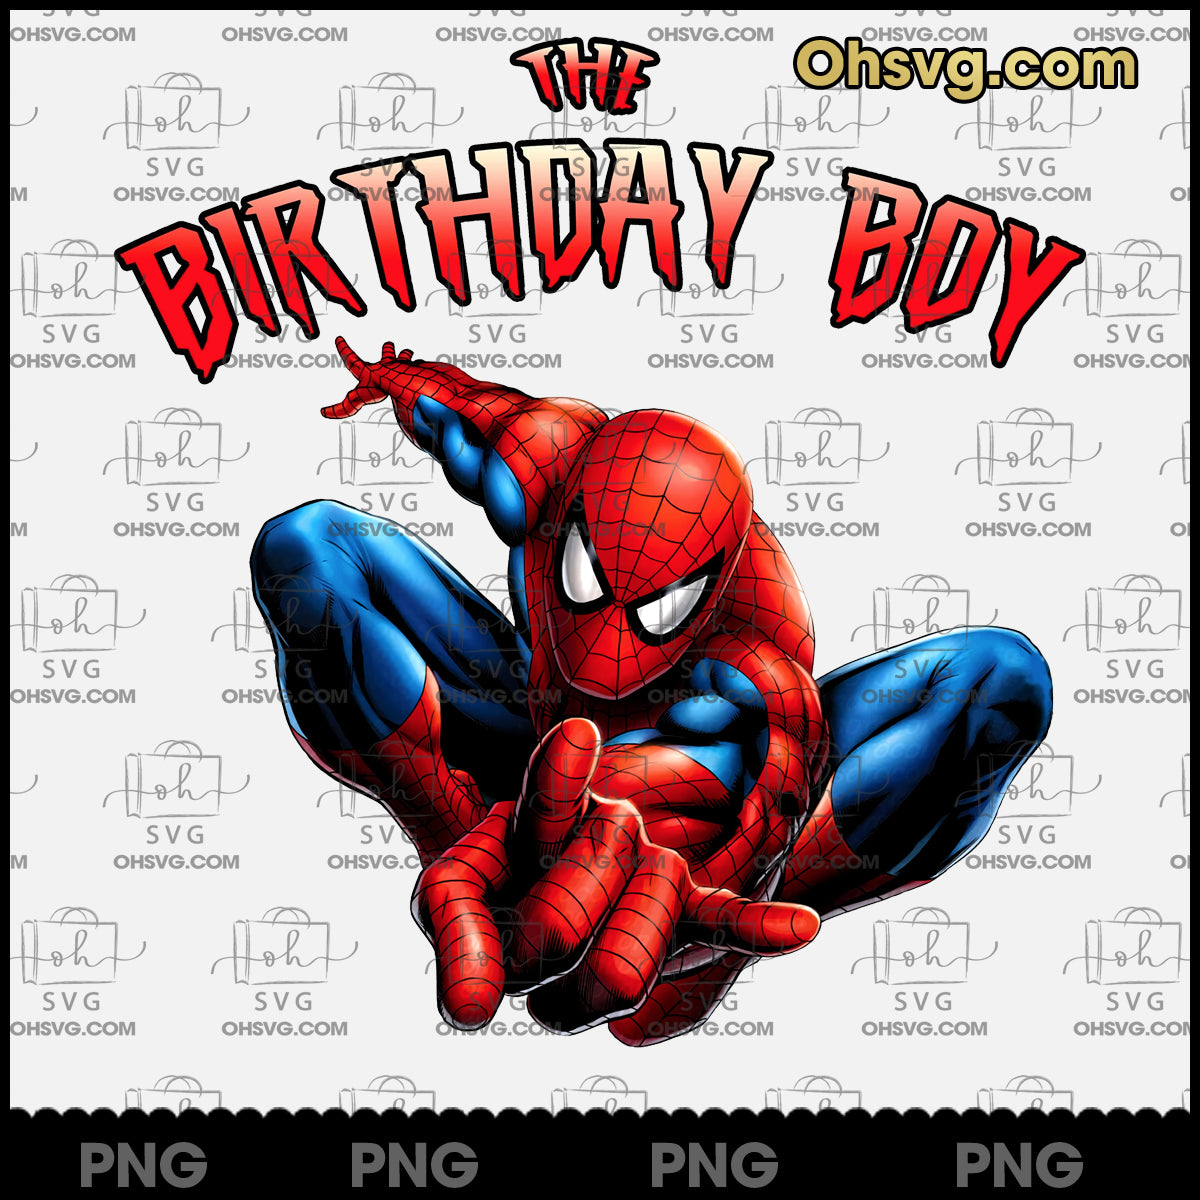 Spiderman PNG, The Birthday Boy PNG, Spiderman PNG, Spiderman Red Suit -  ohsvg